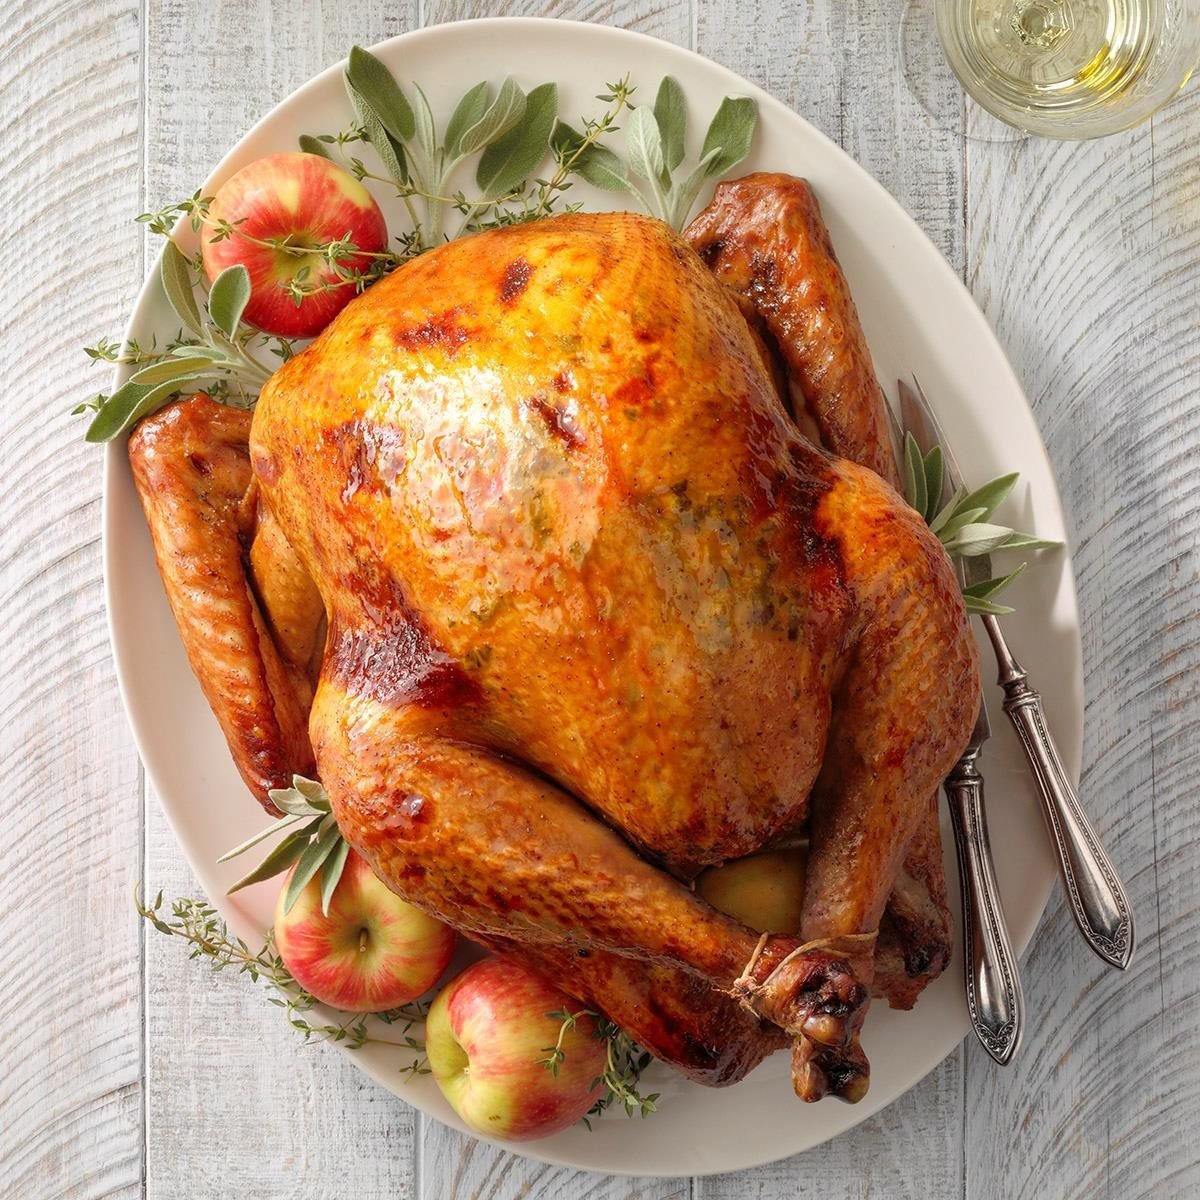 Stop Stuffing! What to Fill Your Turkey with Instead